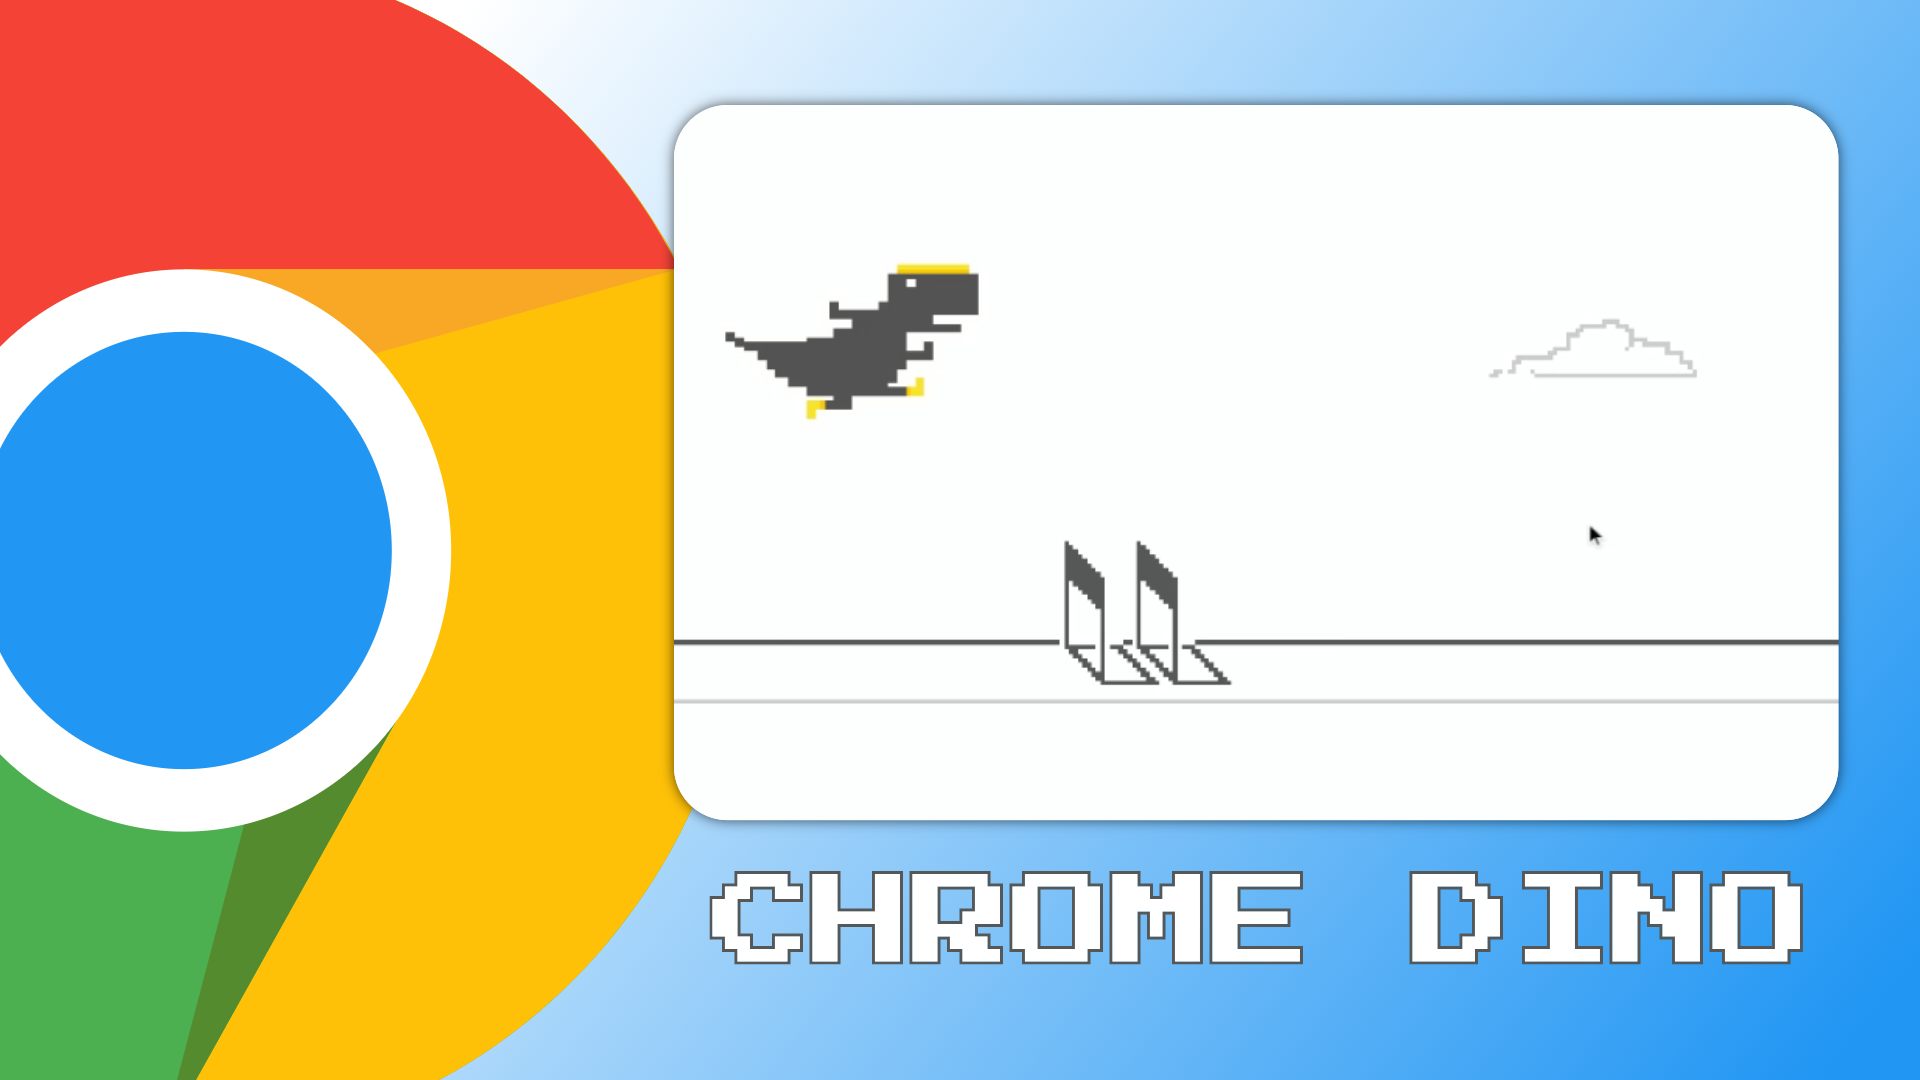 How to disable Dinosaur game in Chrome when device is offline